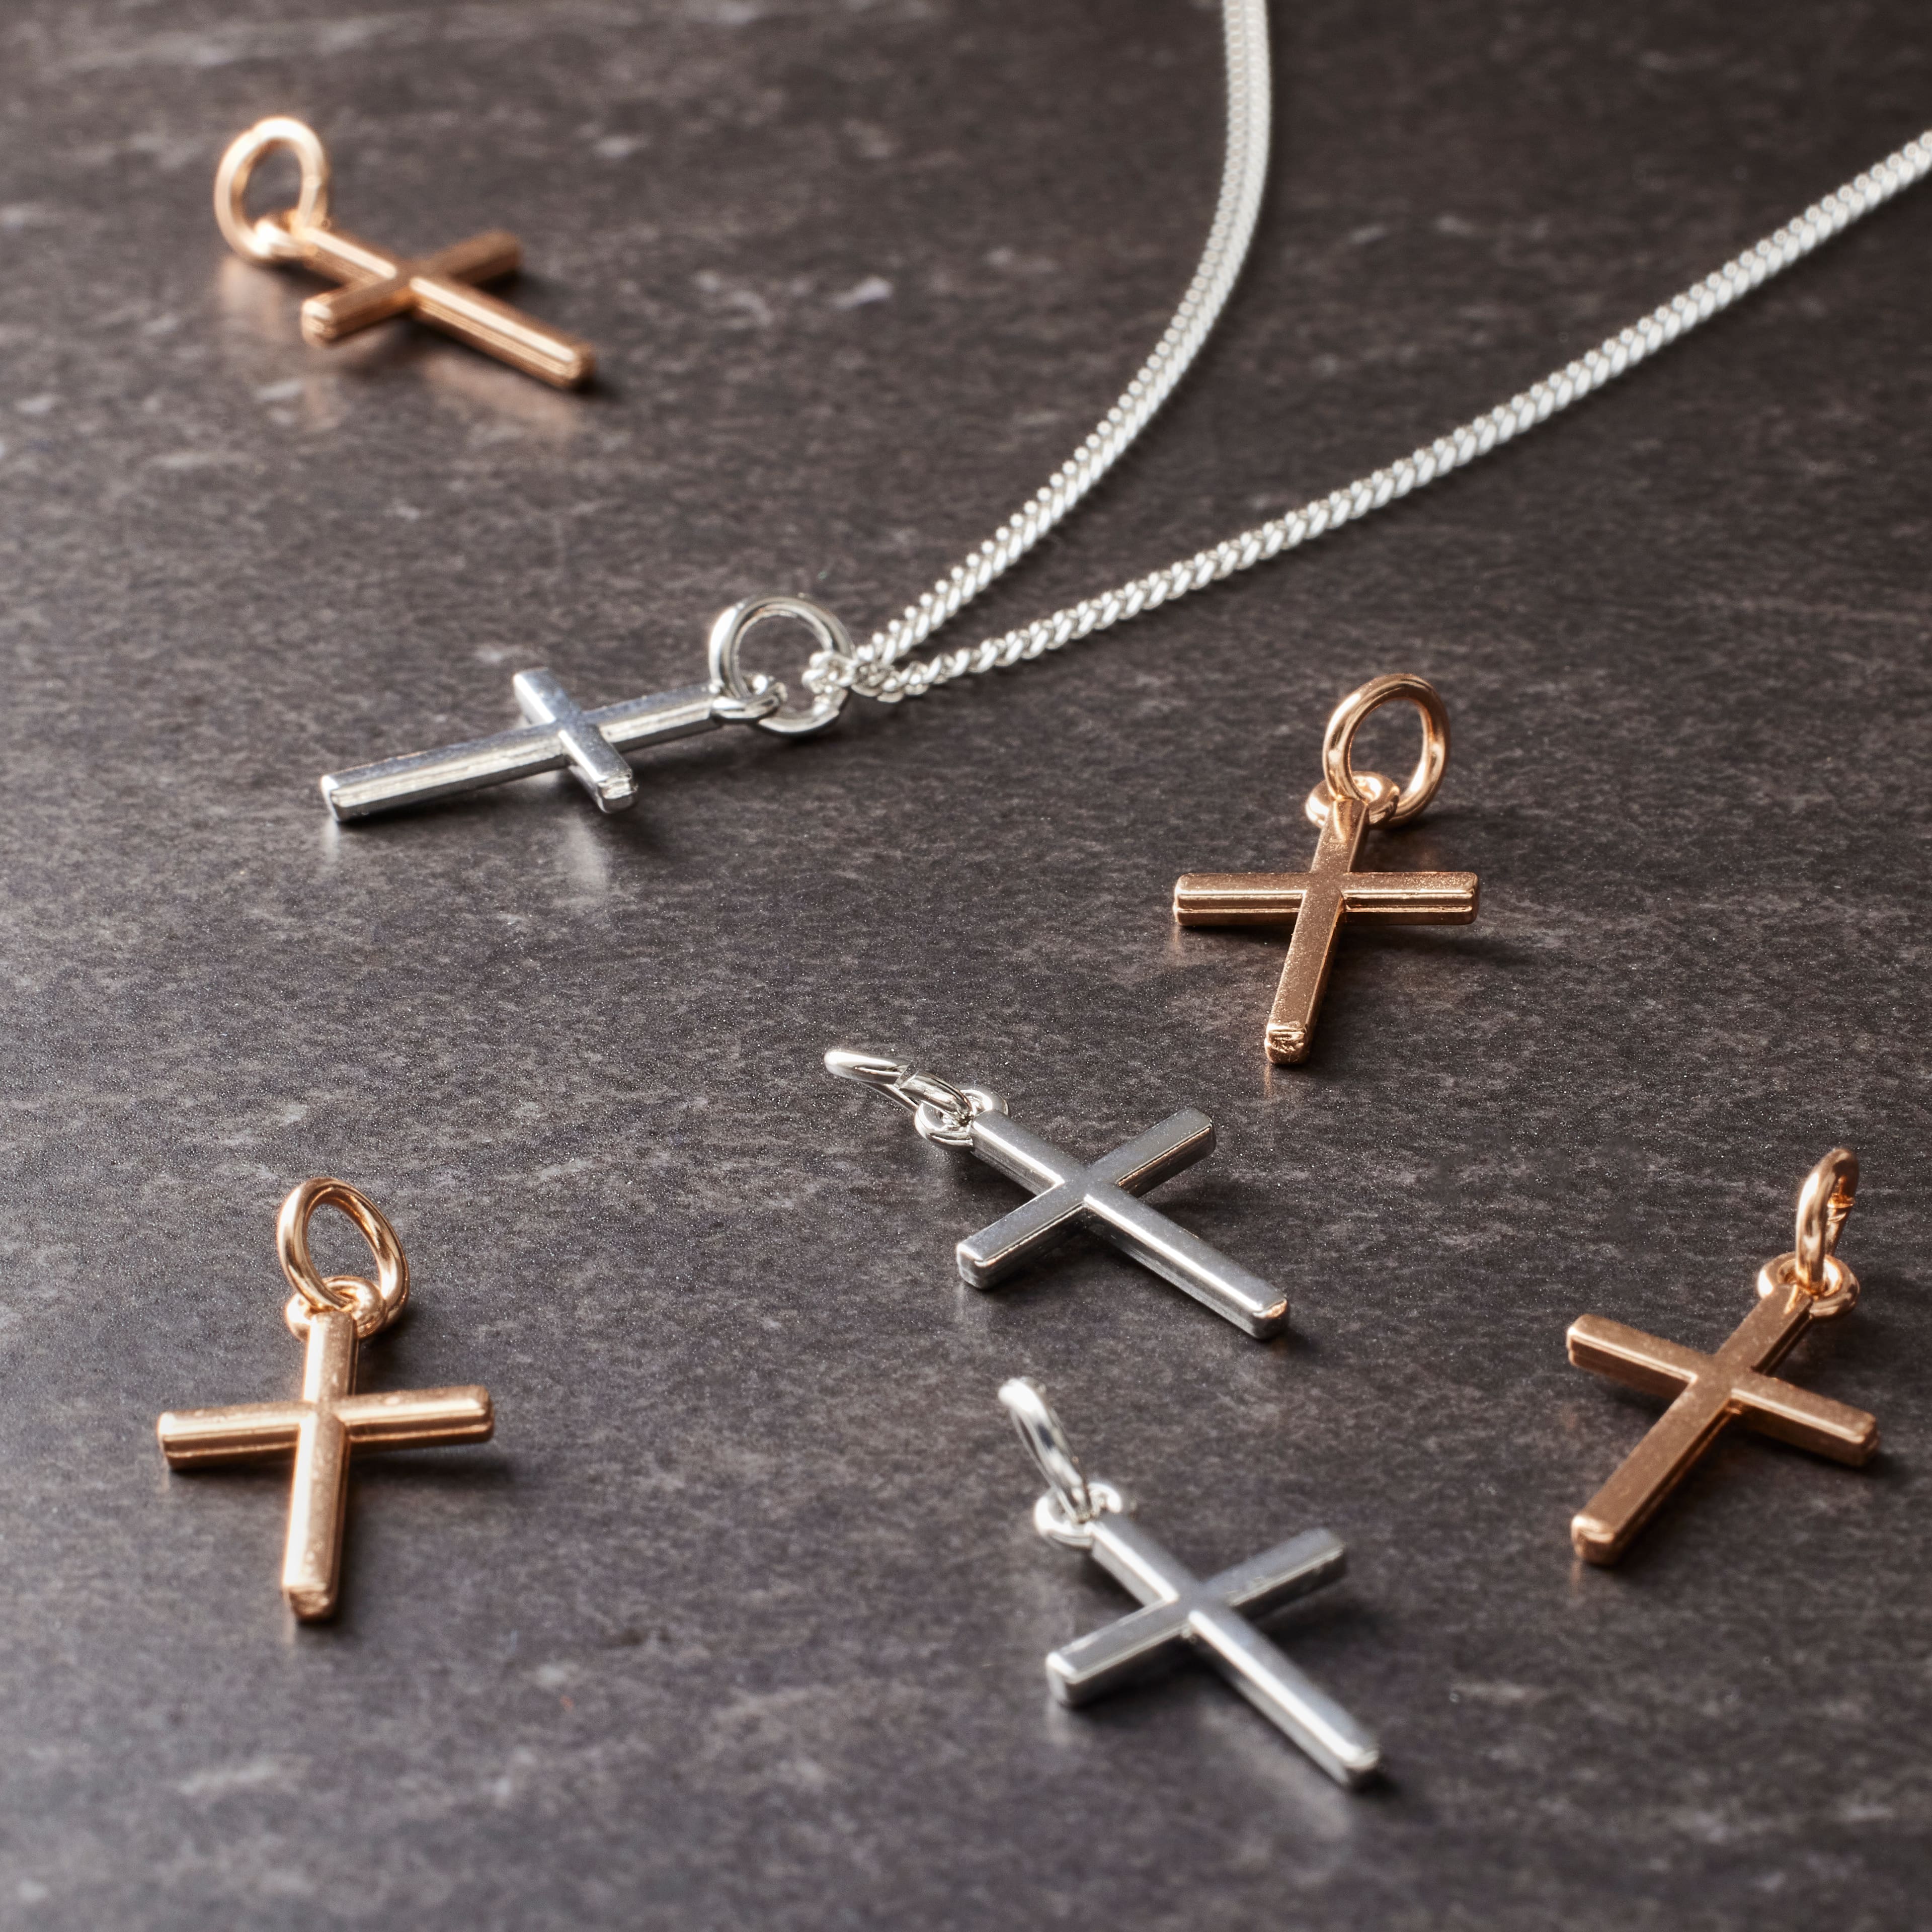 Cutout Cross Charms for Necklaces Jewelry Making, Petite Crucifix